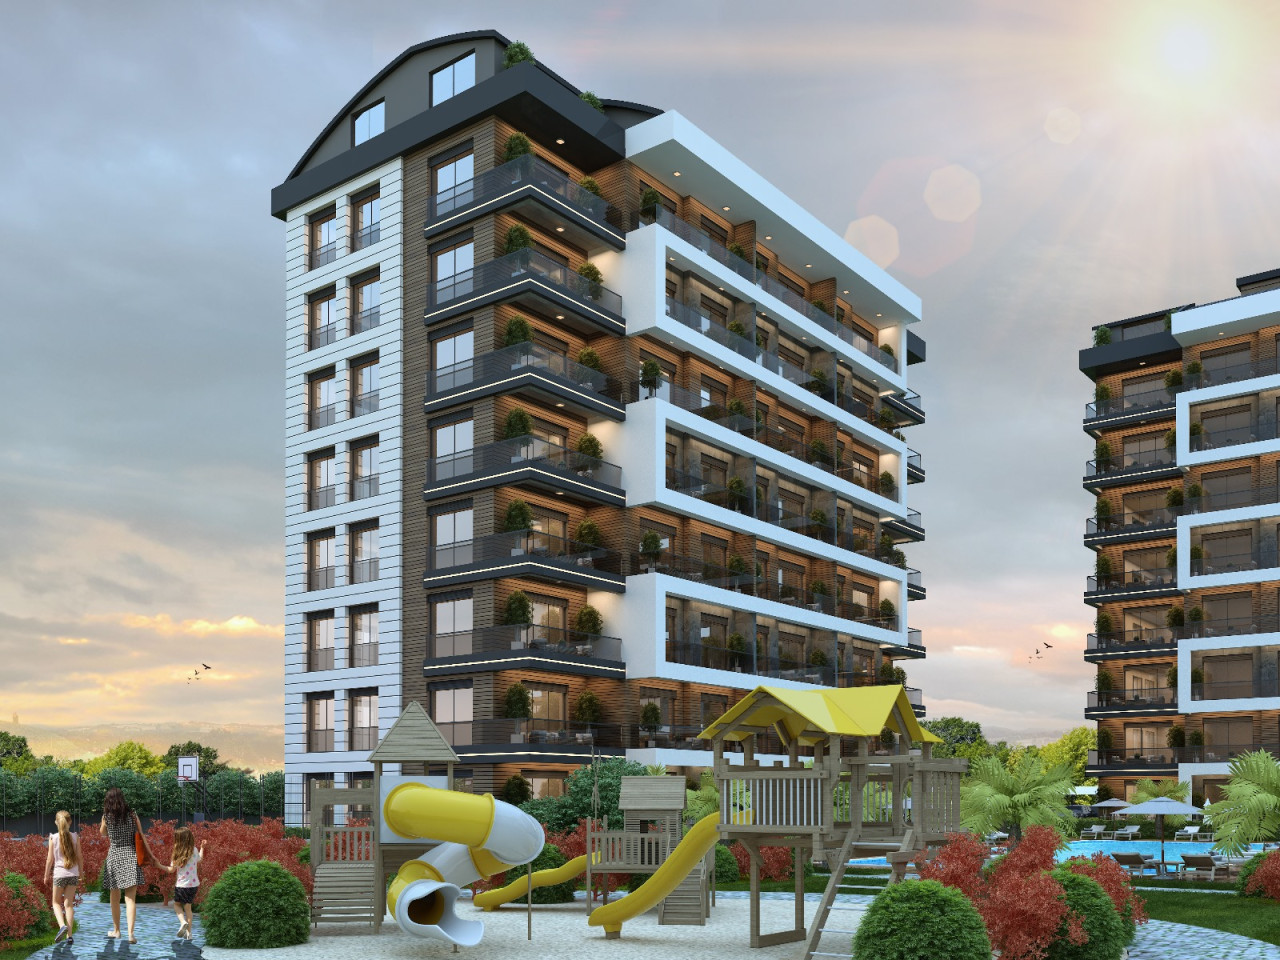 Apartments for sale at the கBEYOGLU RESIDENCE கin Altinach, Antalya